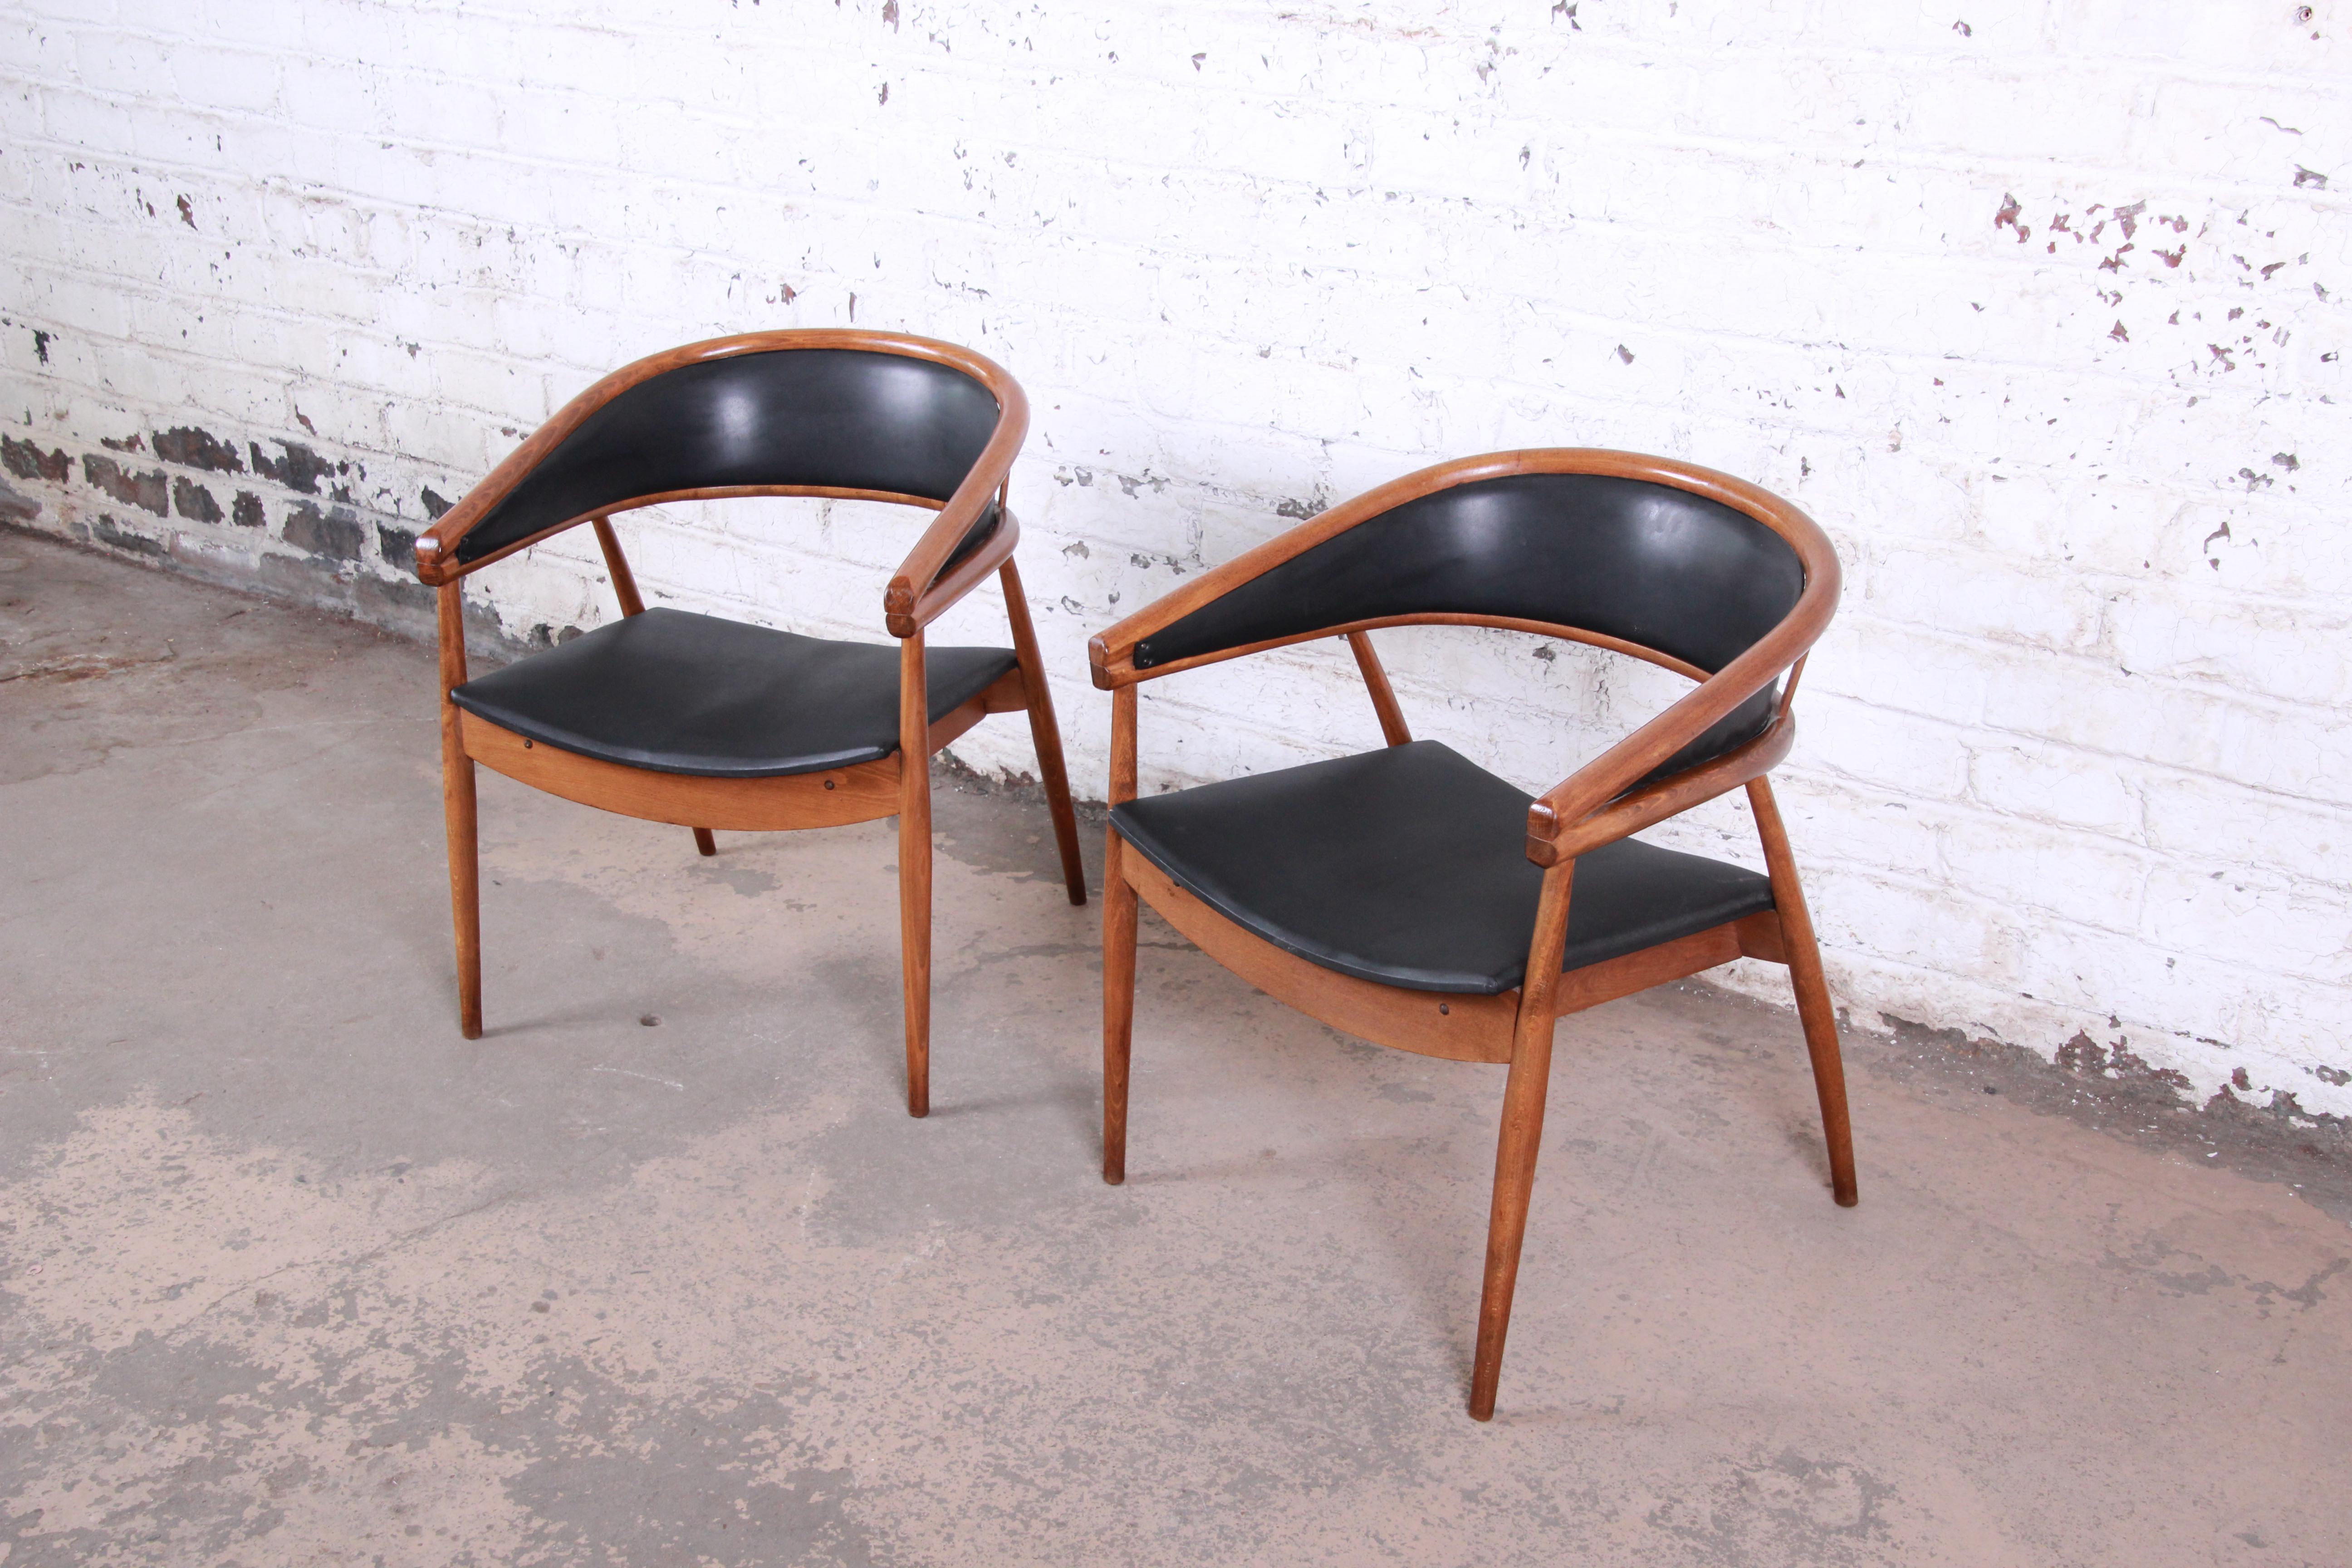 An exceptional pair of James Mont style bent beechwood club chairs. Mont famously used this design in Nat King Coles' Miami Penthouse project. The chairs feature a stunning bentwood design and original black vinyl upholstery. The chairs are in very